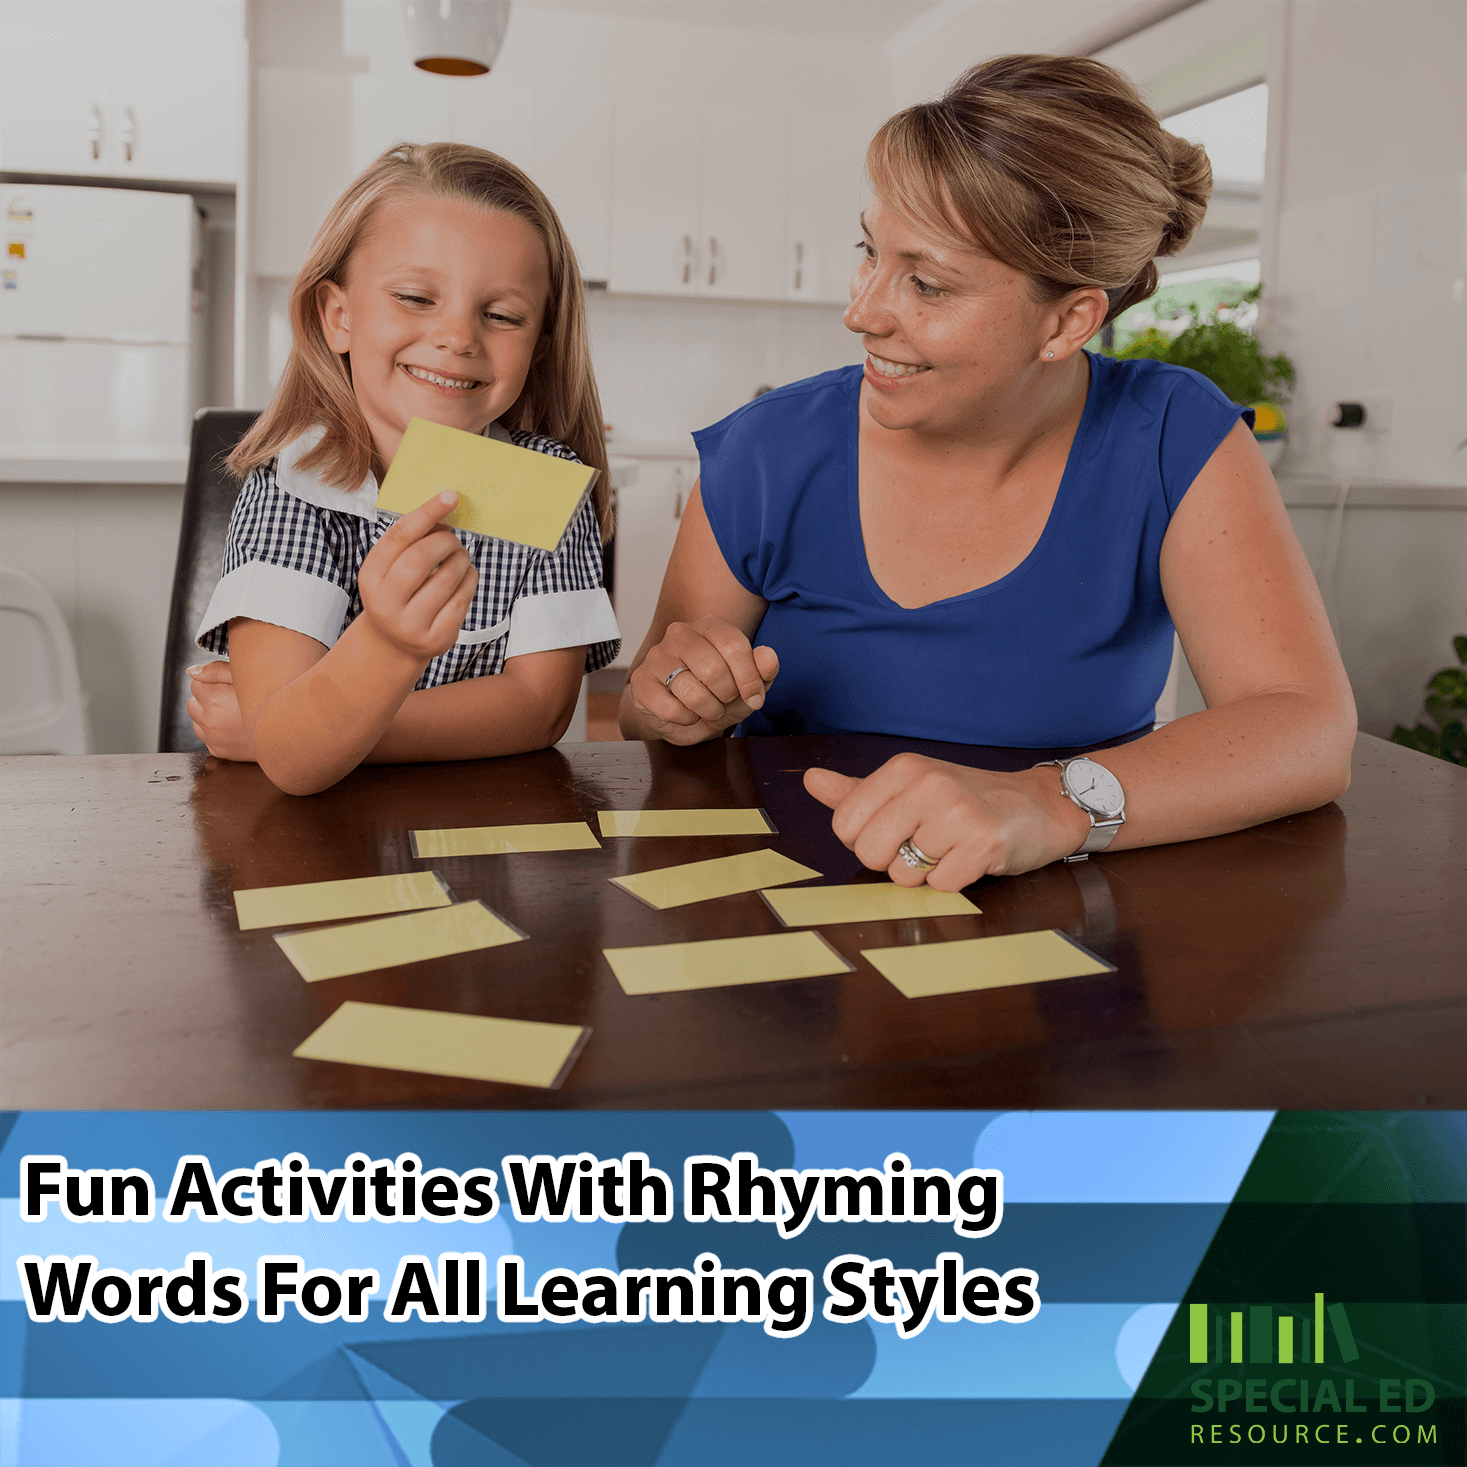 Mother and daughter smiling and playing with rhyming word cards on a kitchen table, illustrating one of the fun activities with rhyming words for all learning styles.